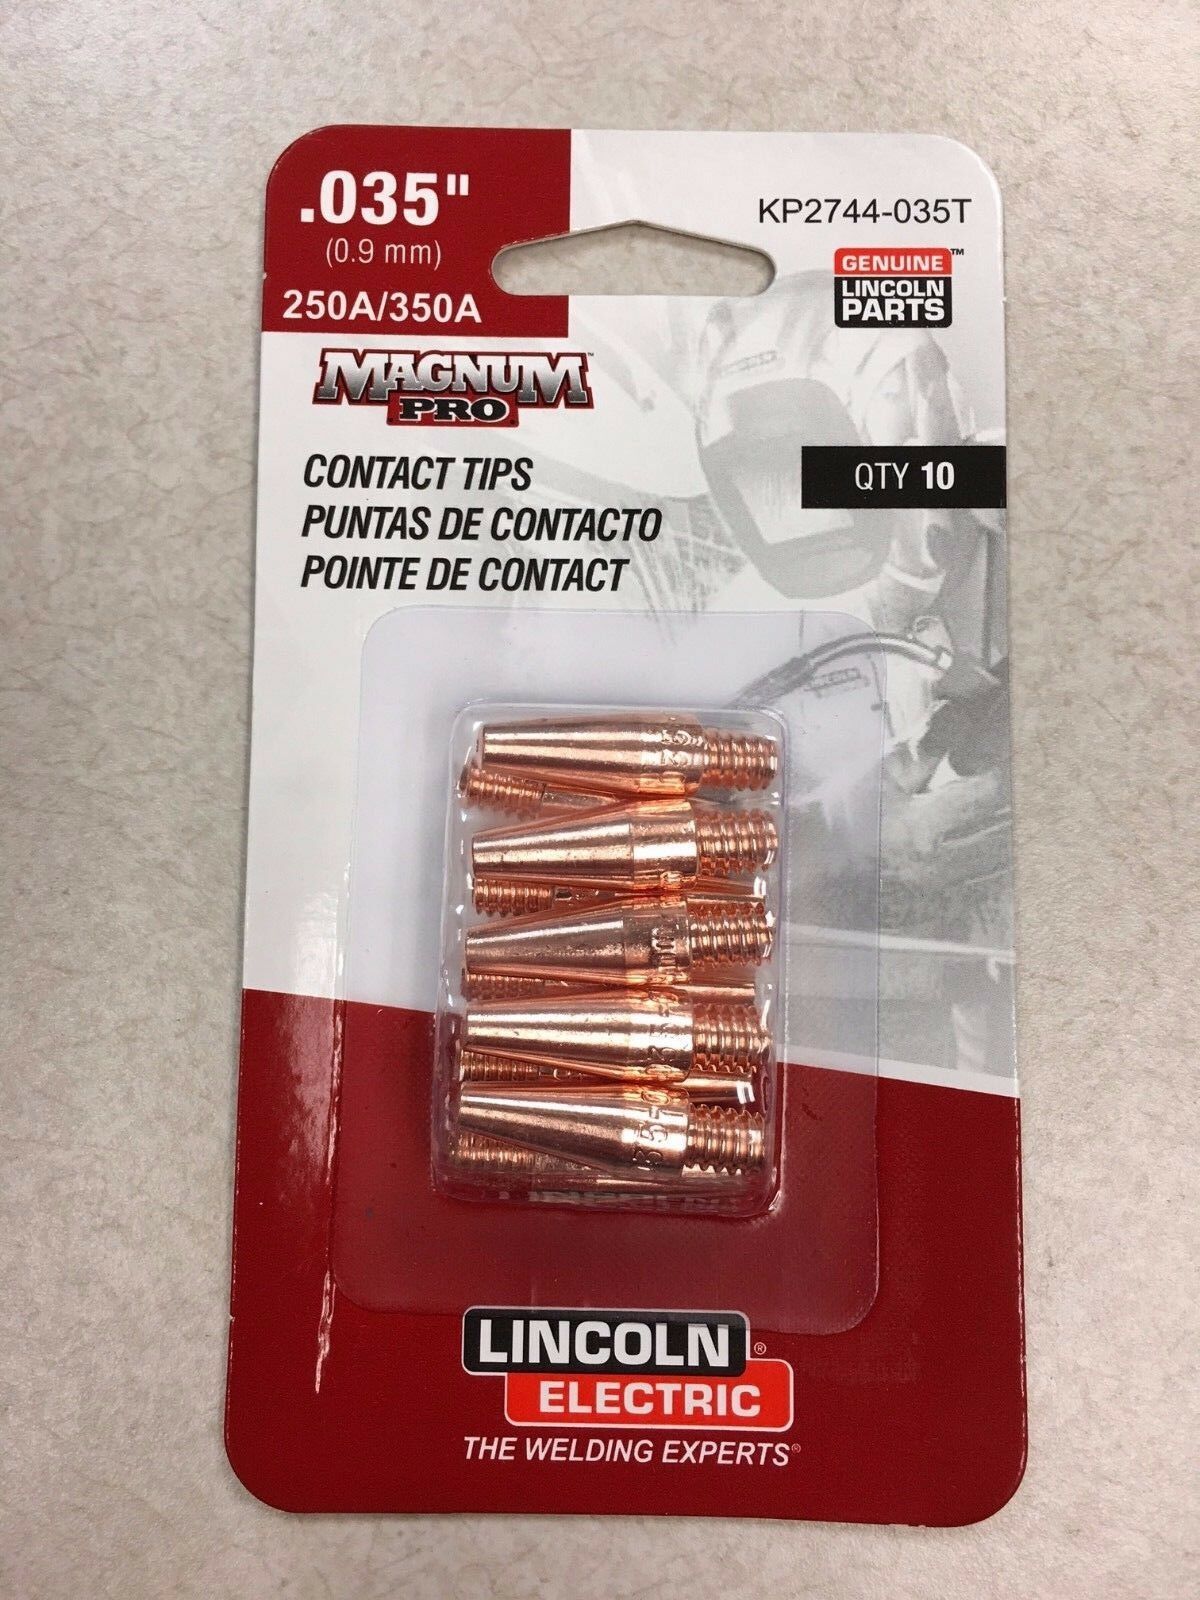 Geniune Lincoln 10pk Electric Magnum Pro Contact Tips .035" 250/350a Kp2744-035t